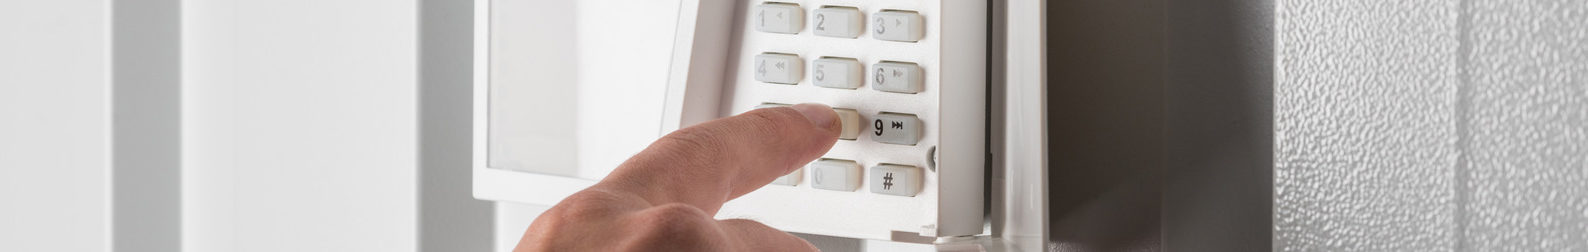 person typing on keypad of security alarm, security system concept